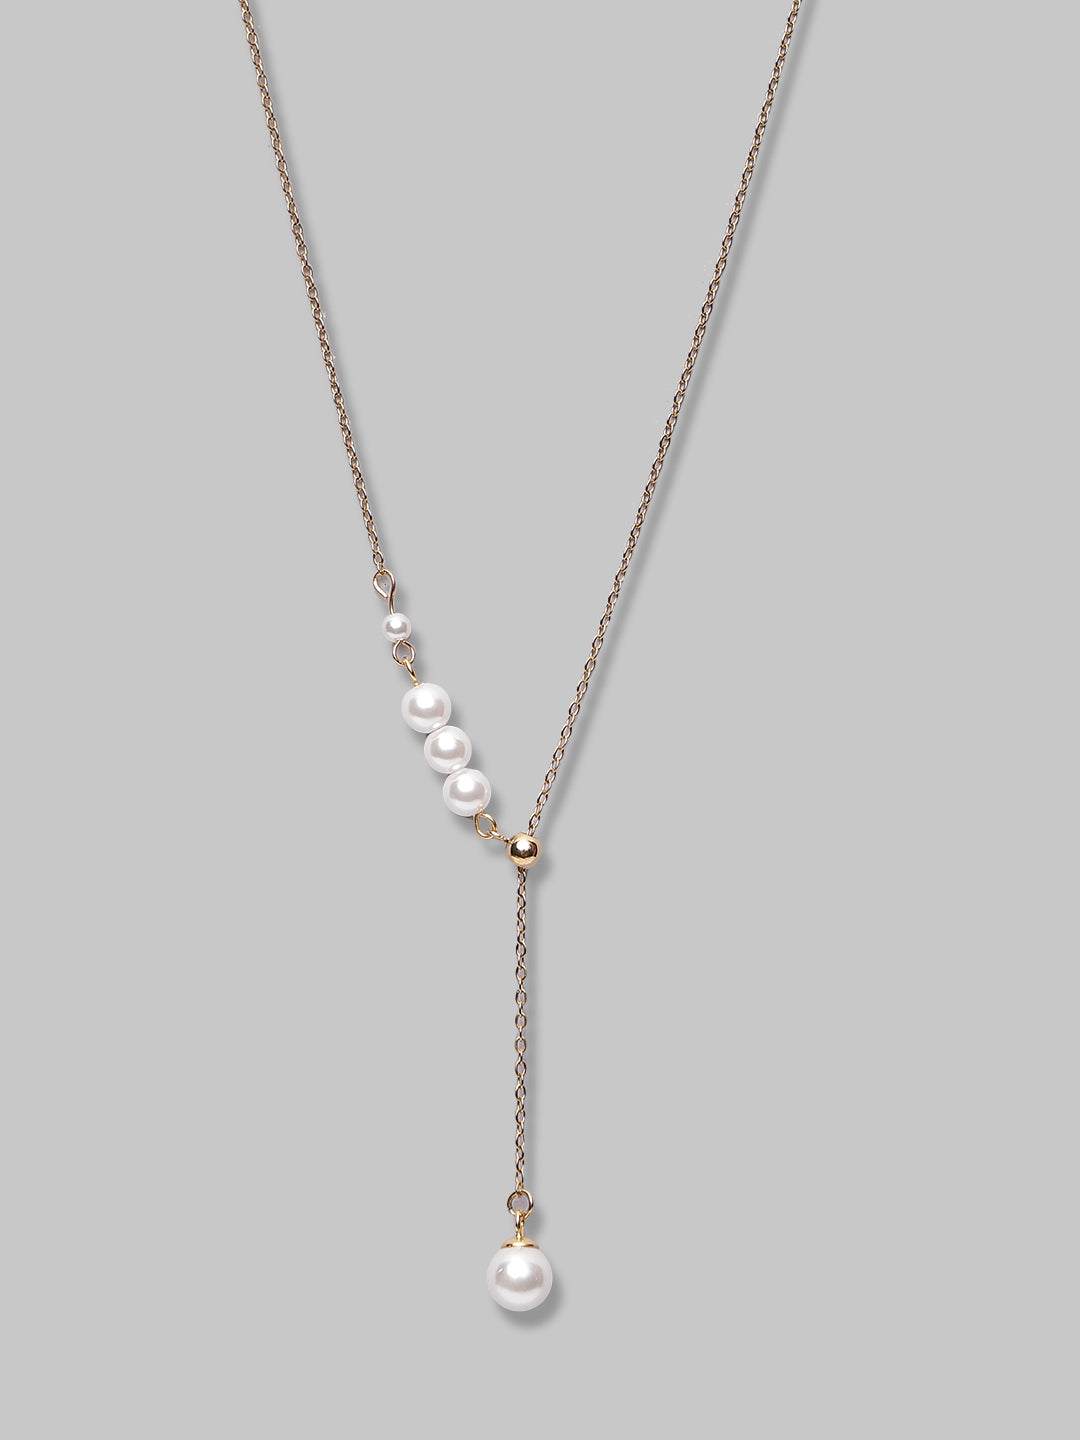 Gold Plated And Latest White Pearl Design Lightweight Chain For Women And Girls